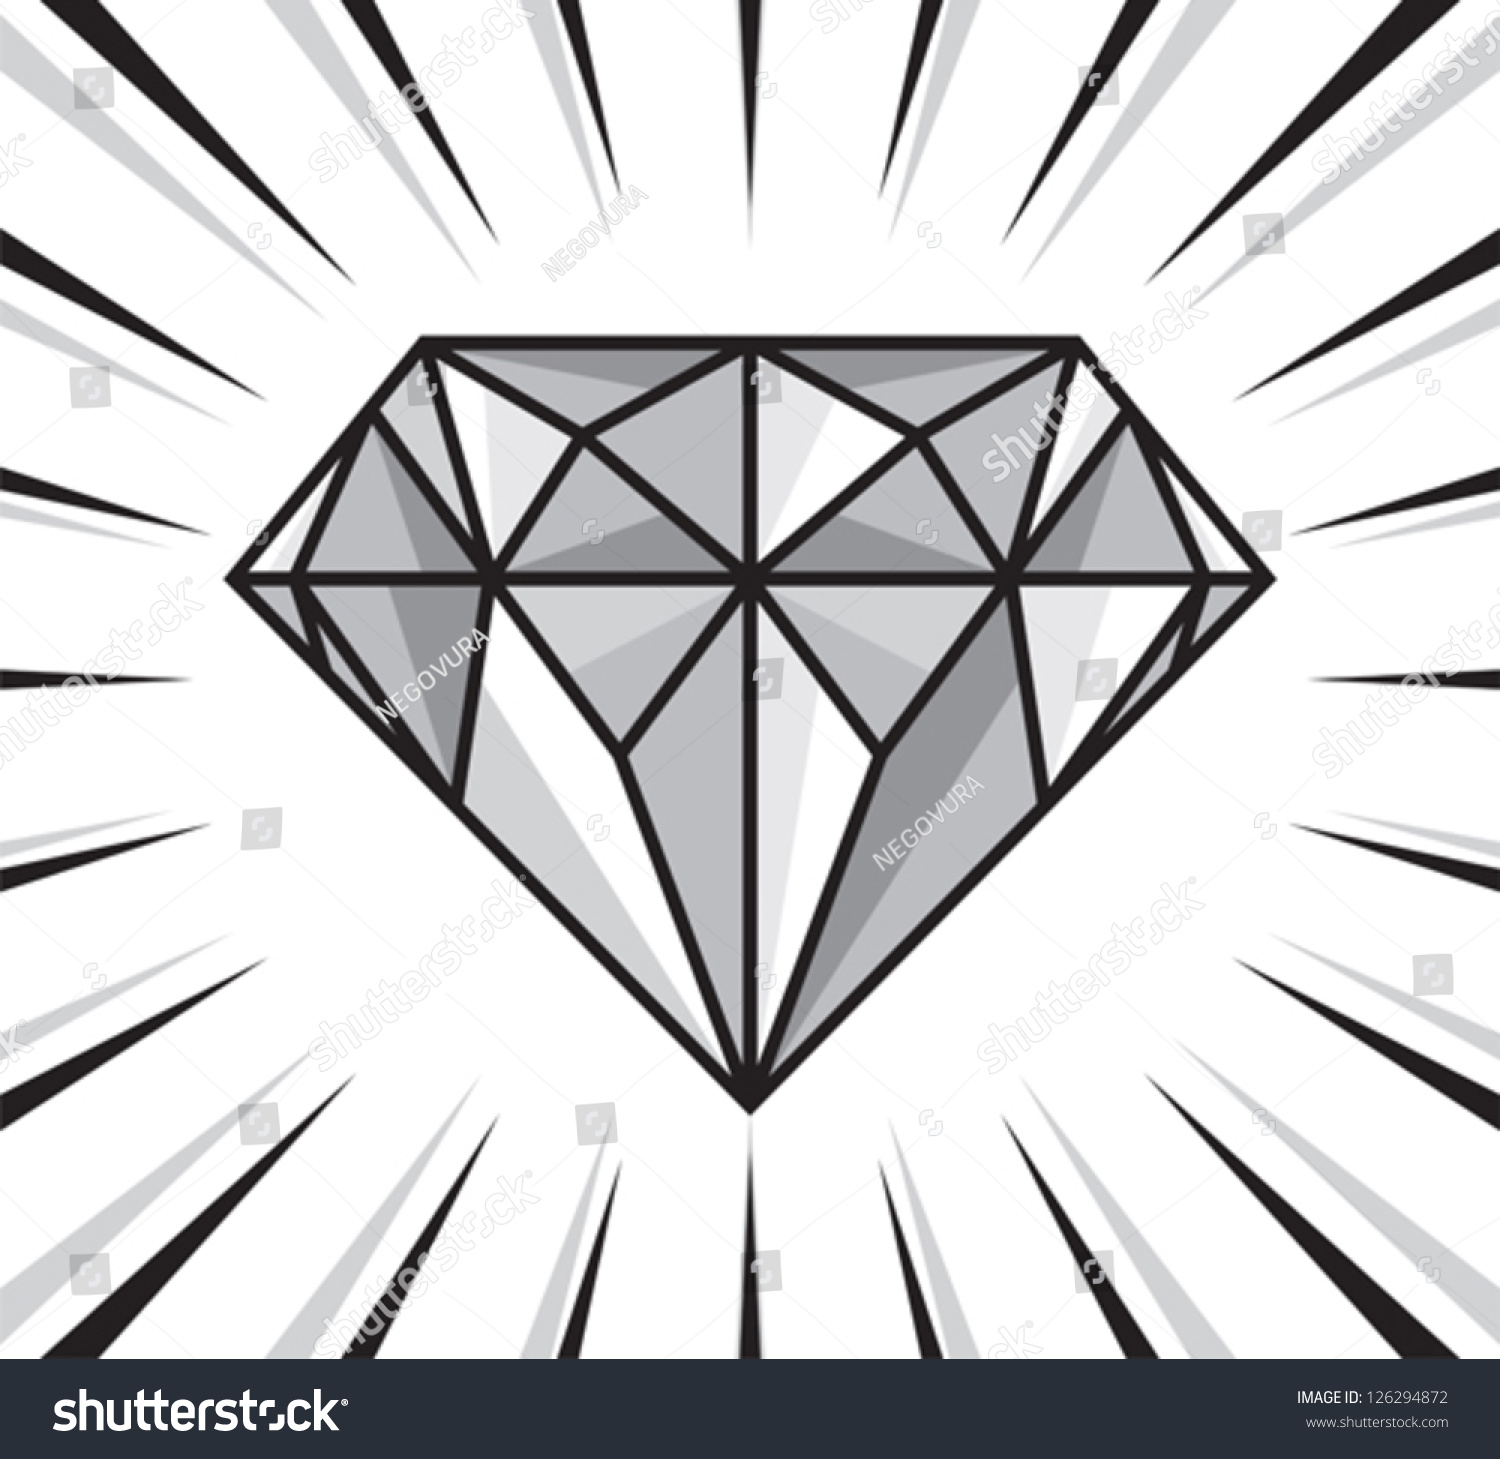 Free Download Vector Diamond Outline